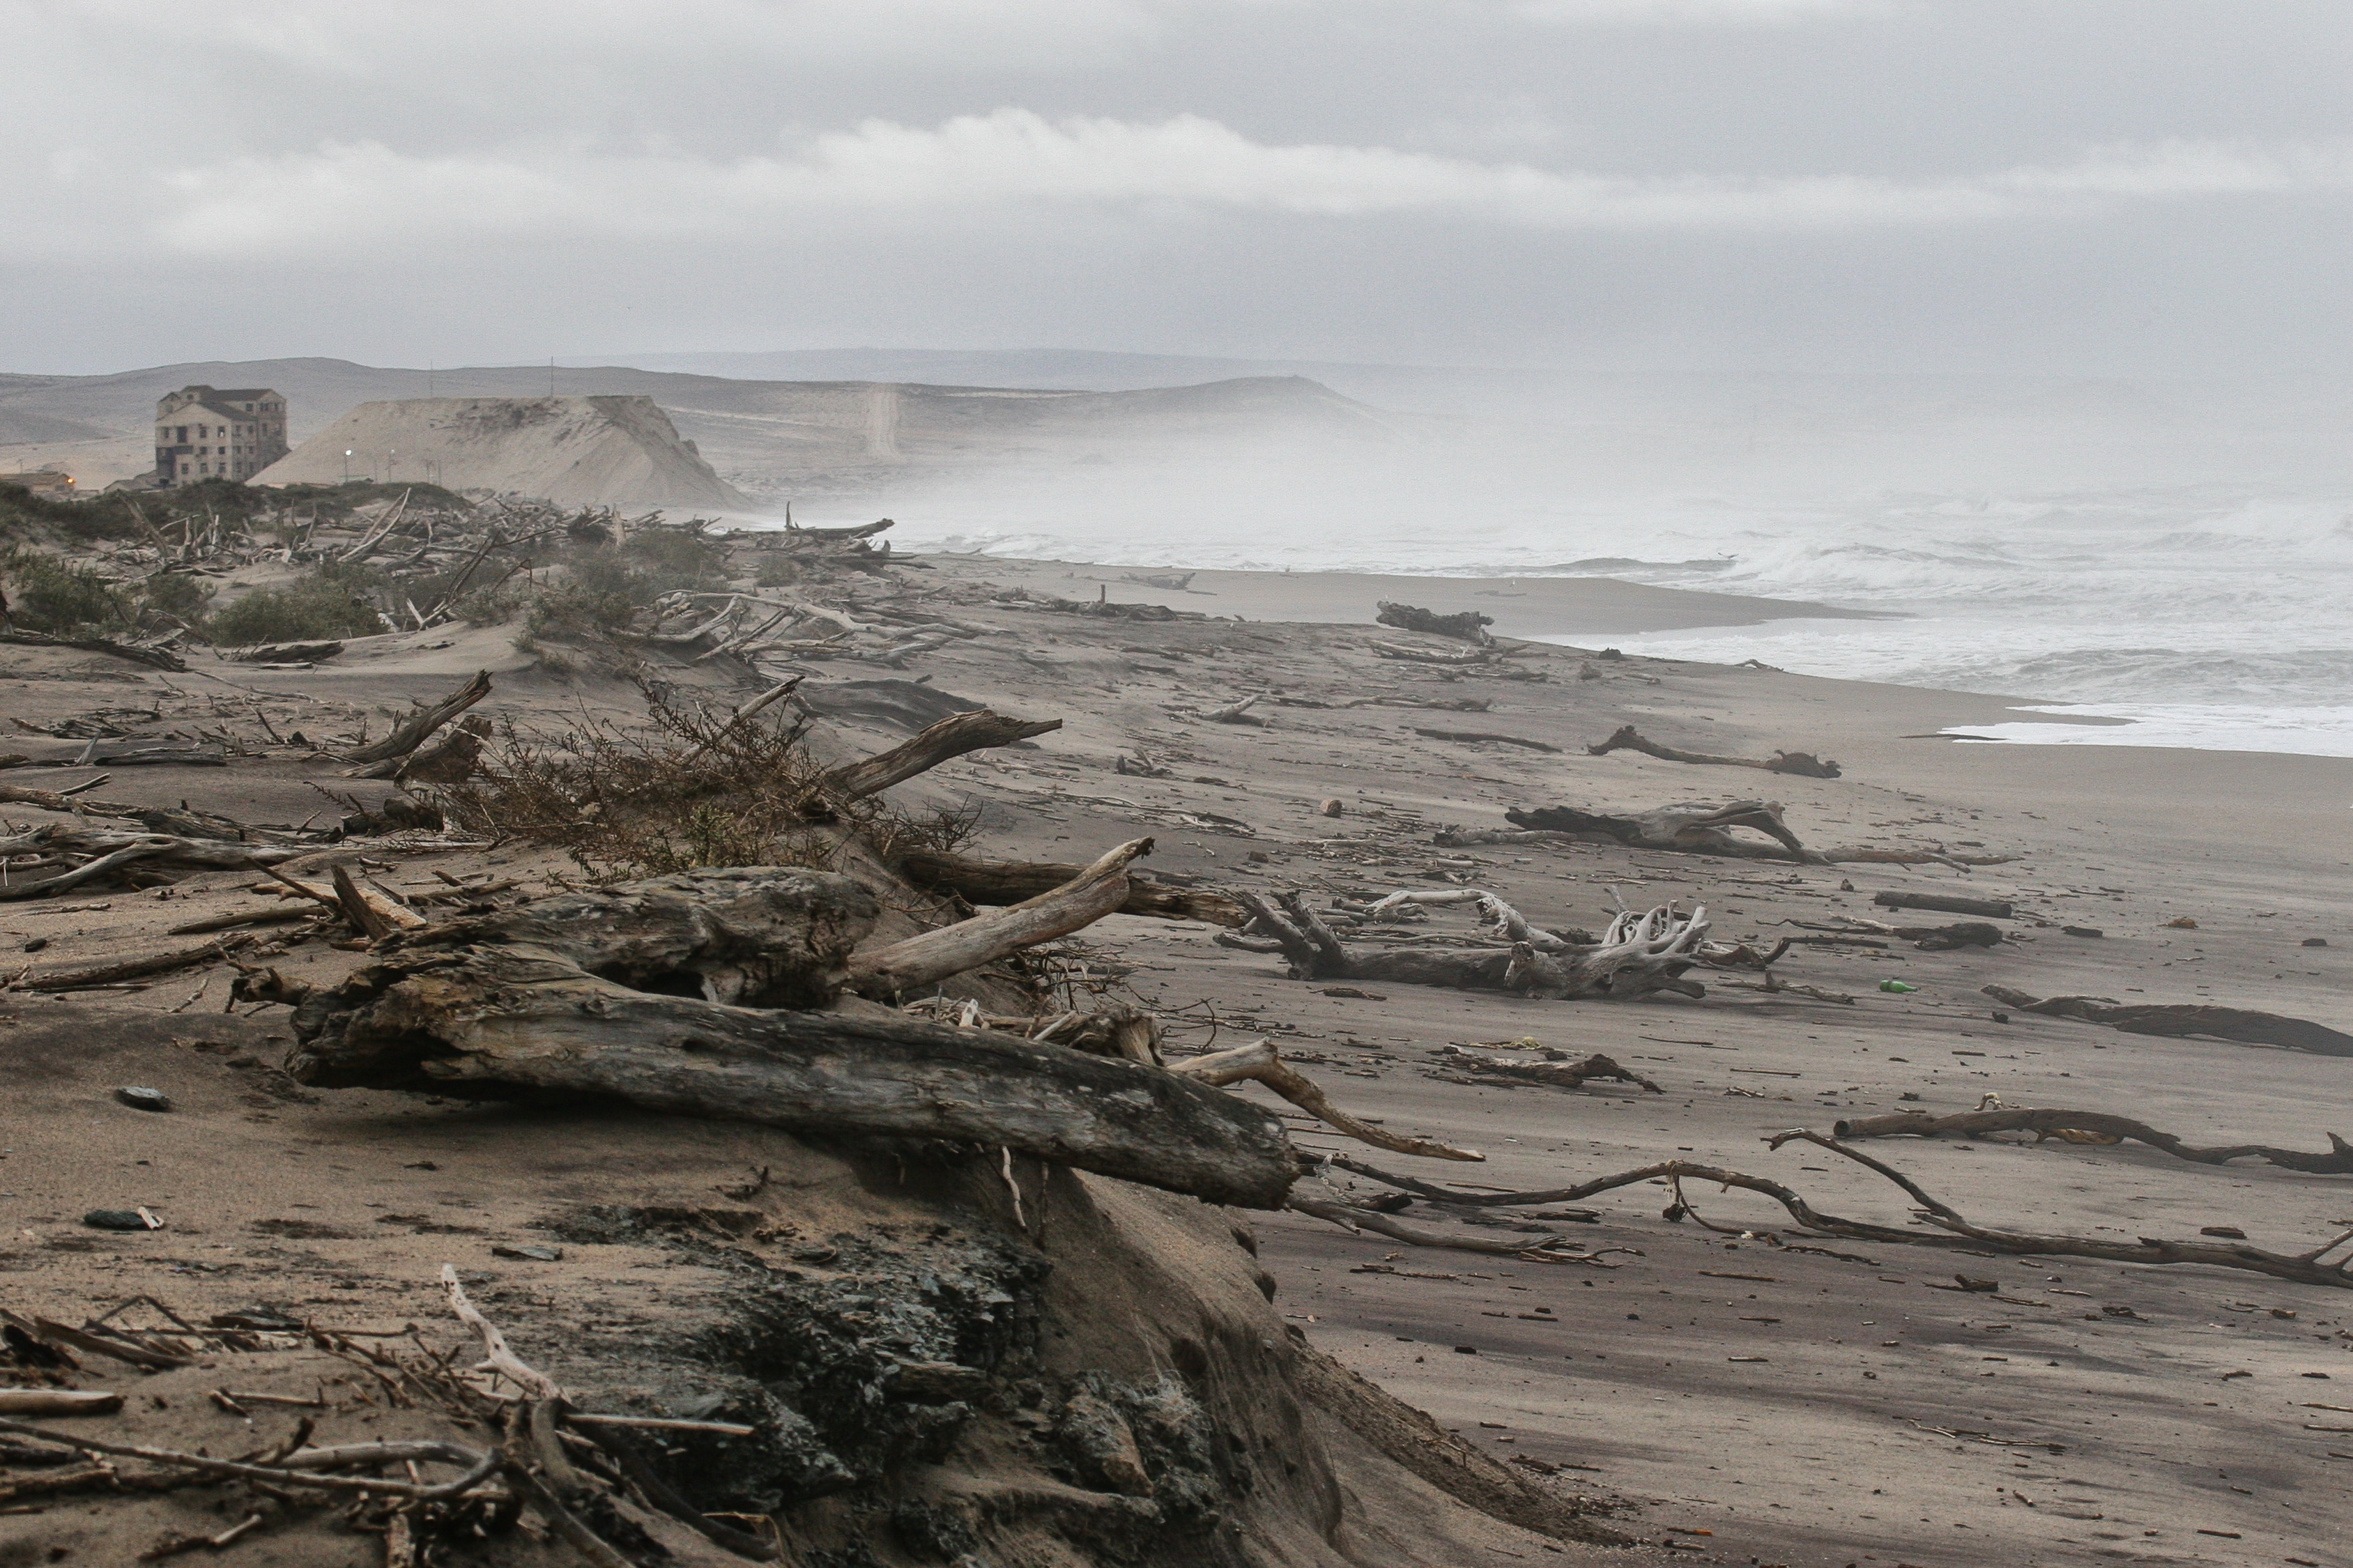 The driftwood-laden beach near the mouth of the Orange River.